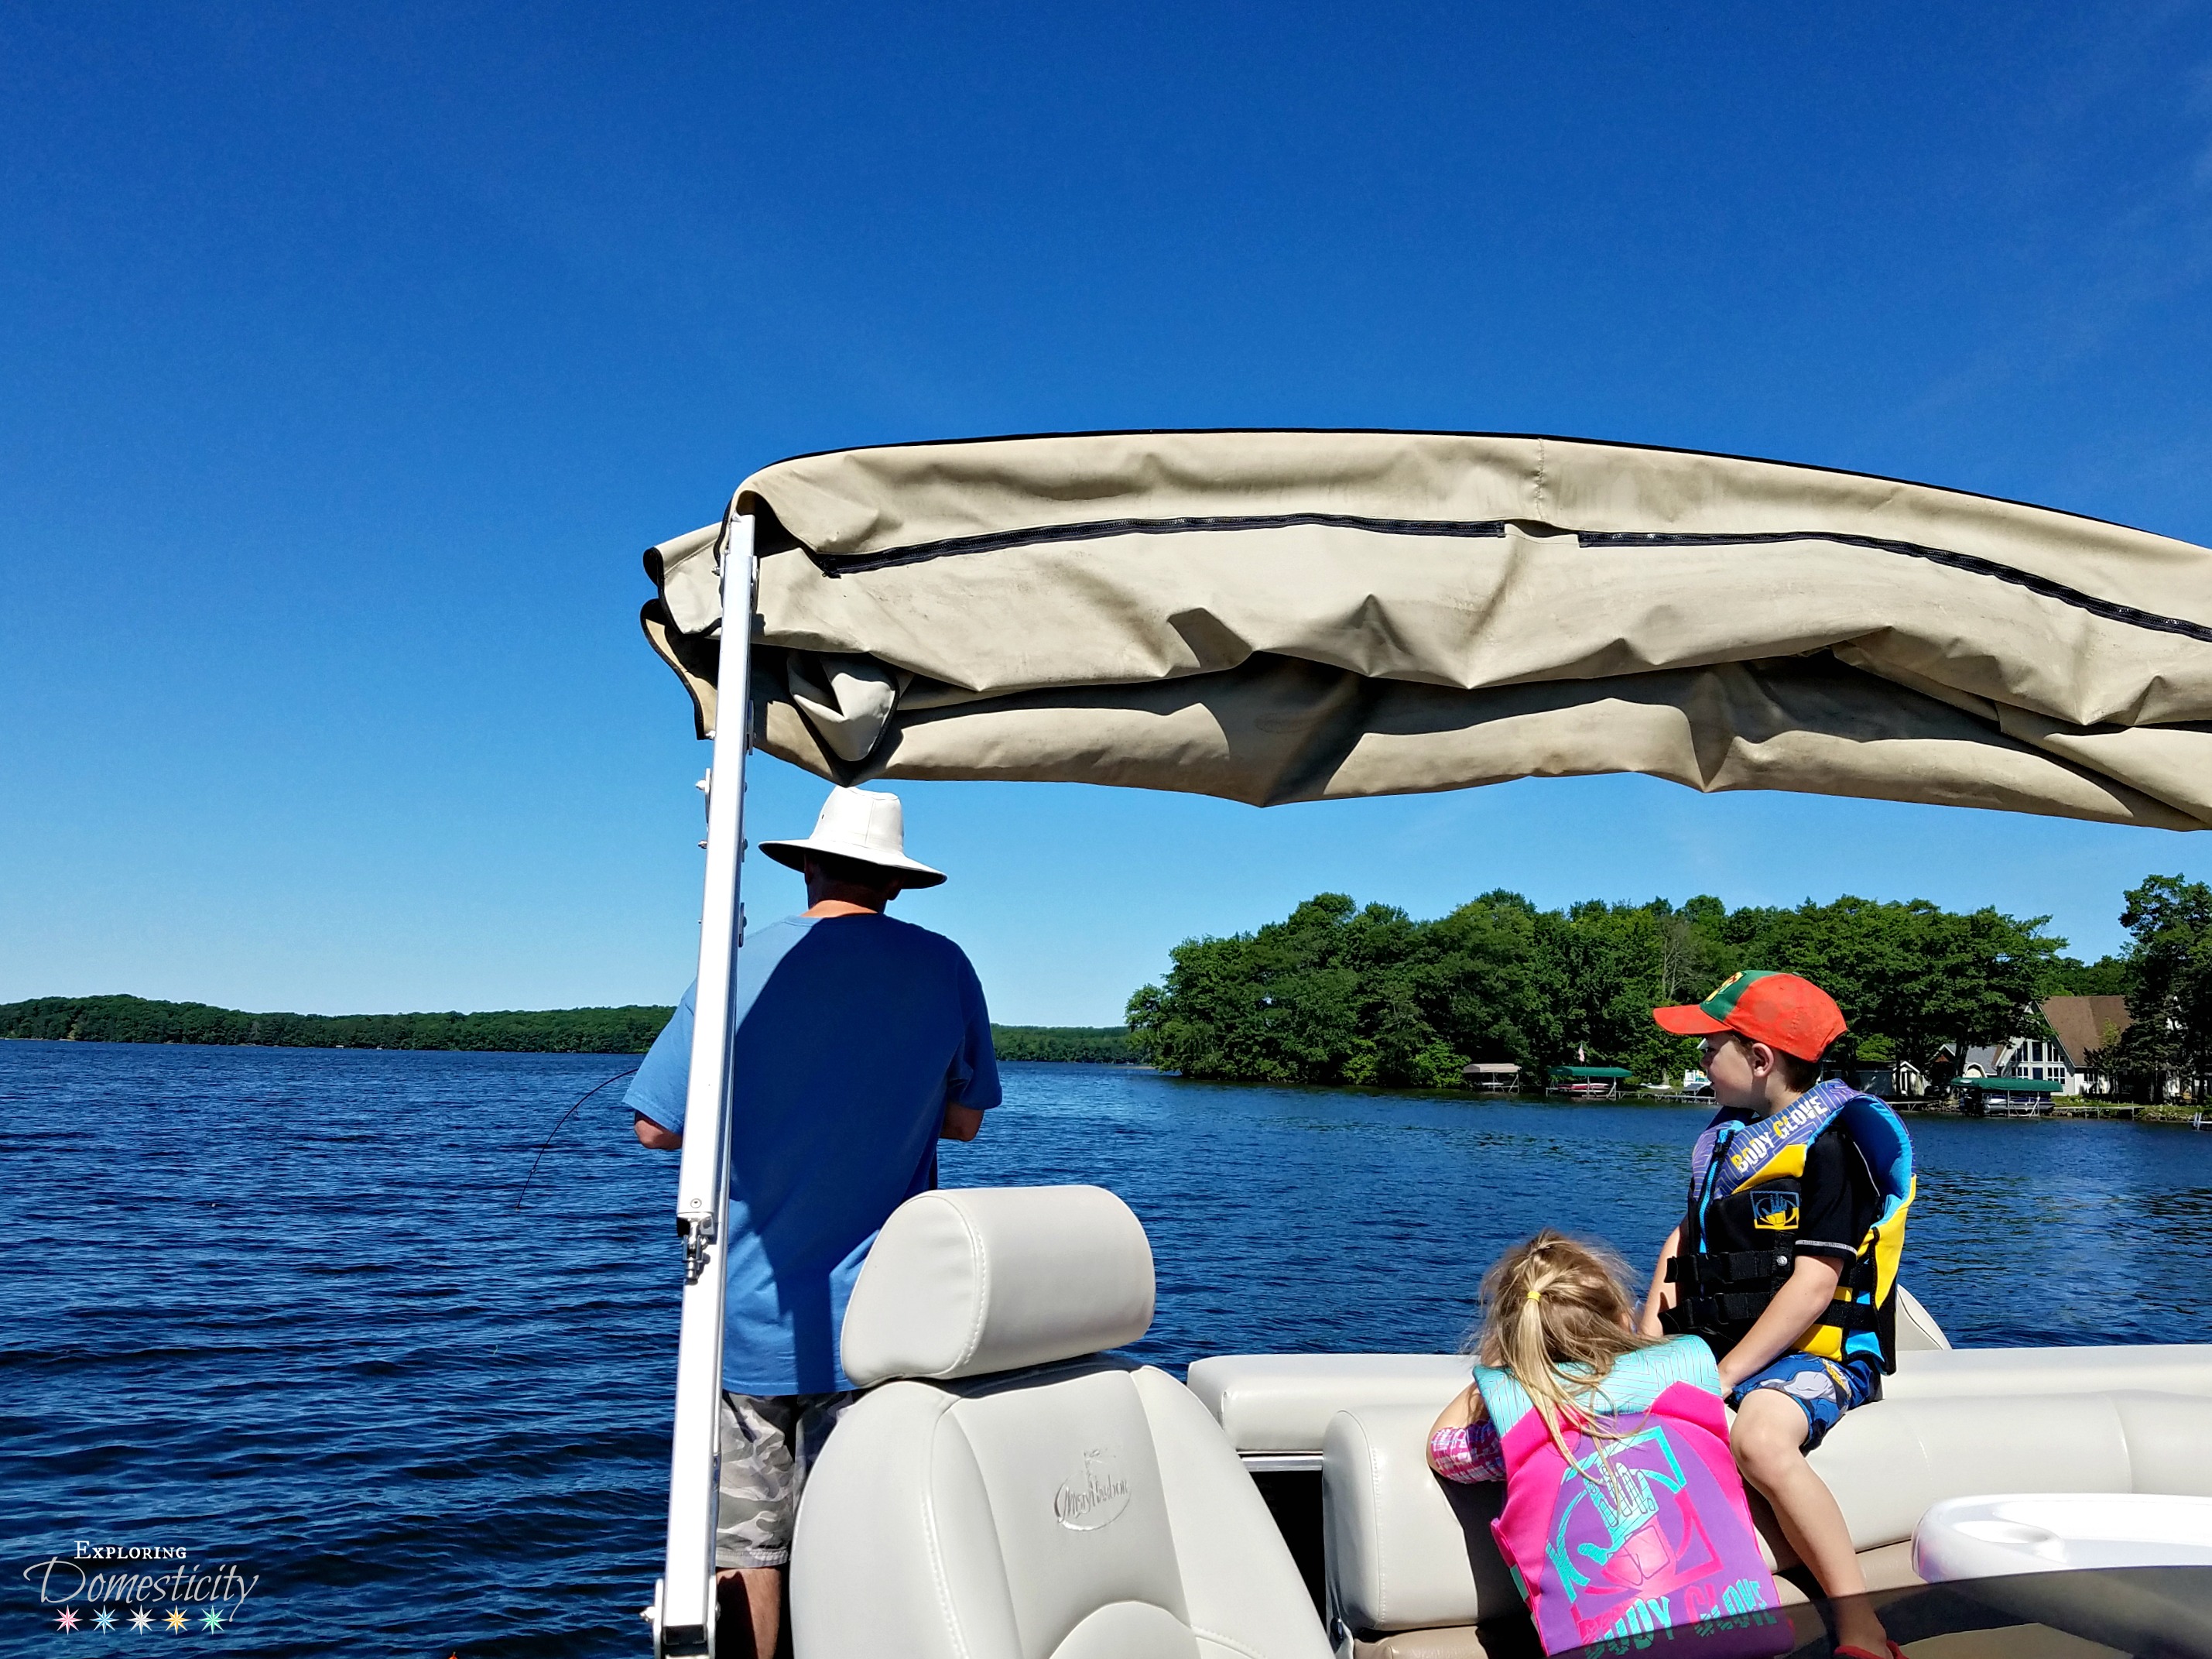 Summer Staycation Ideas - Make family memories with boating